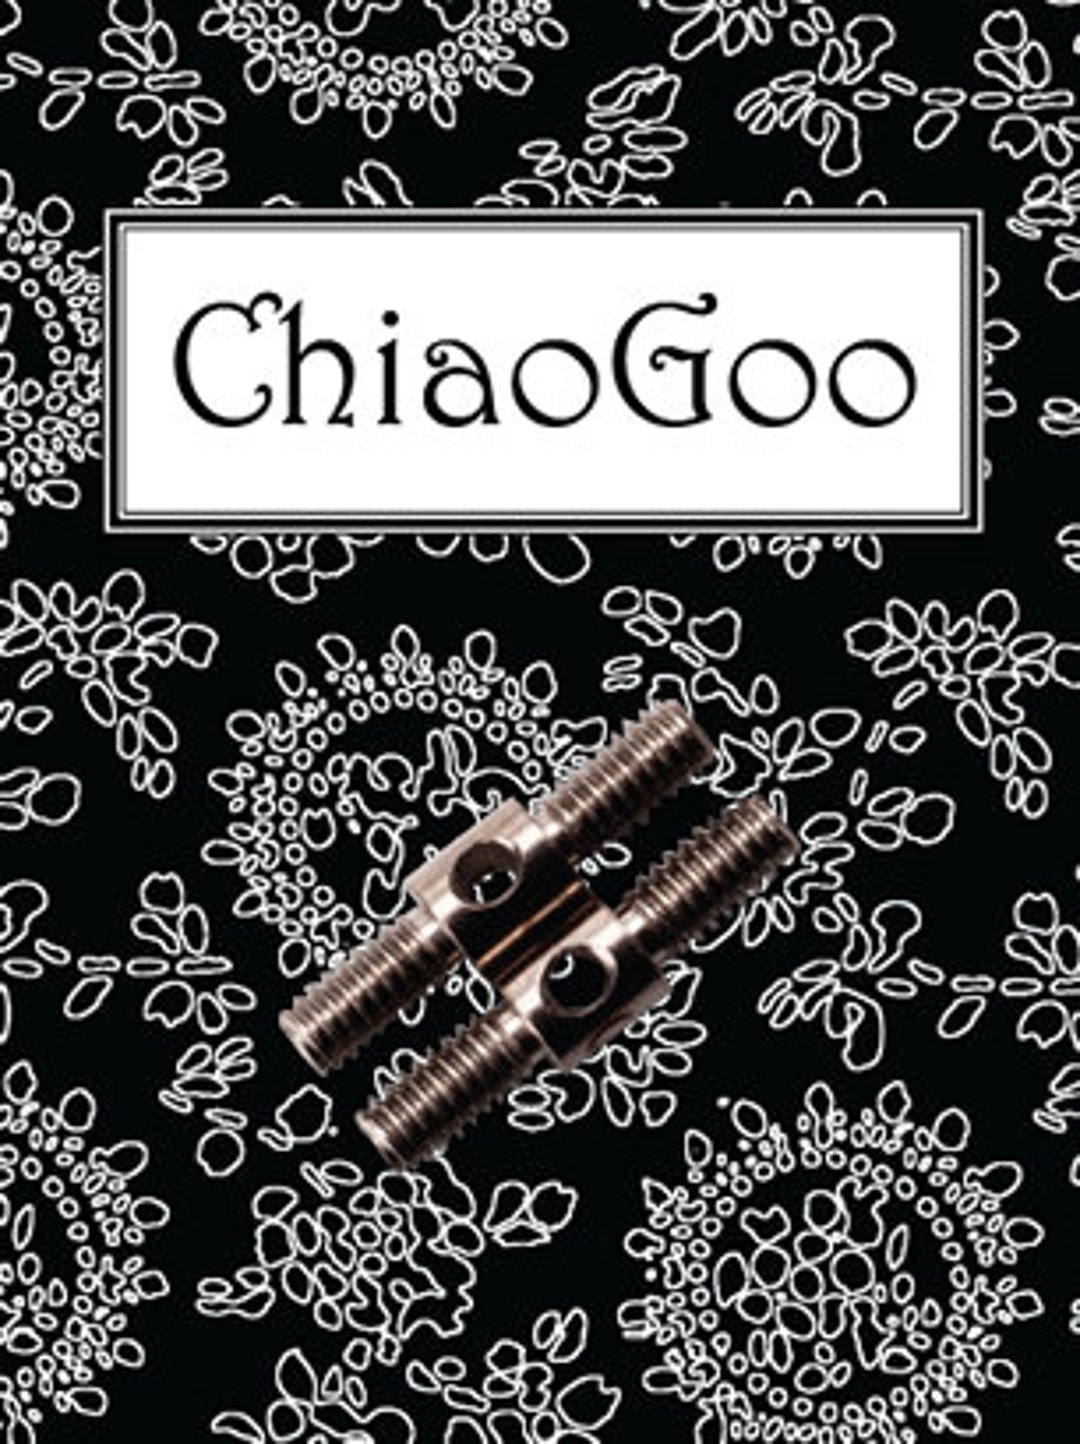 ChiaoGoo Twist Shorties Combo Sets 2 & 3 Needles Tips with